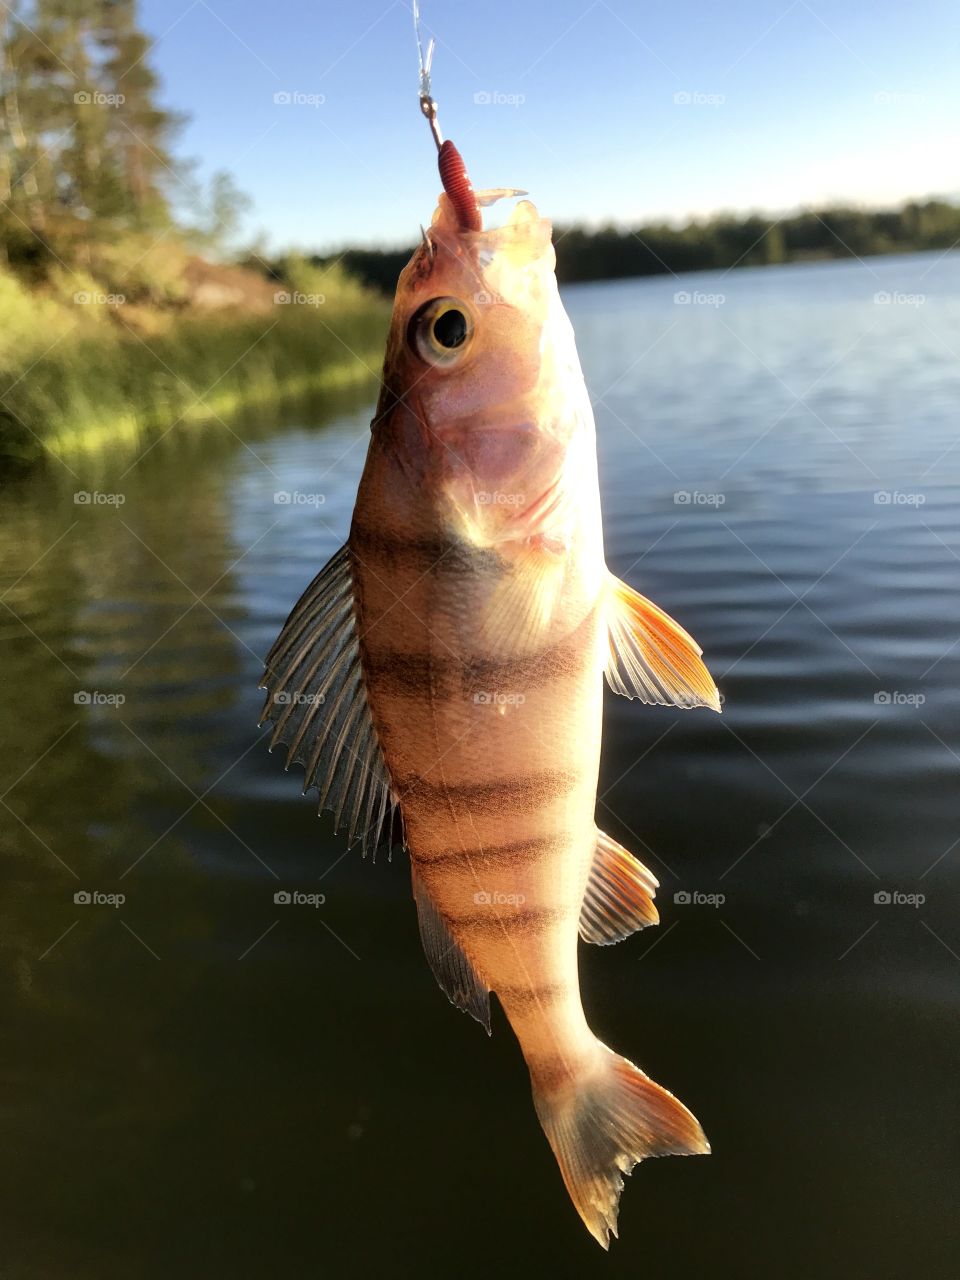 Small perch on a hook and worm